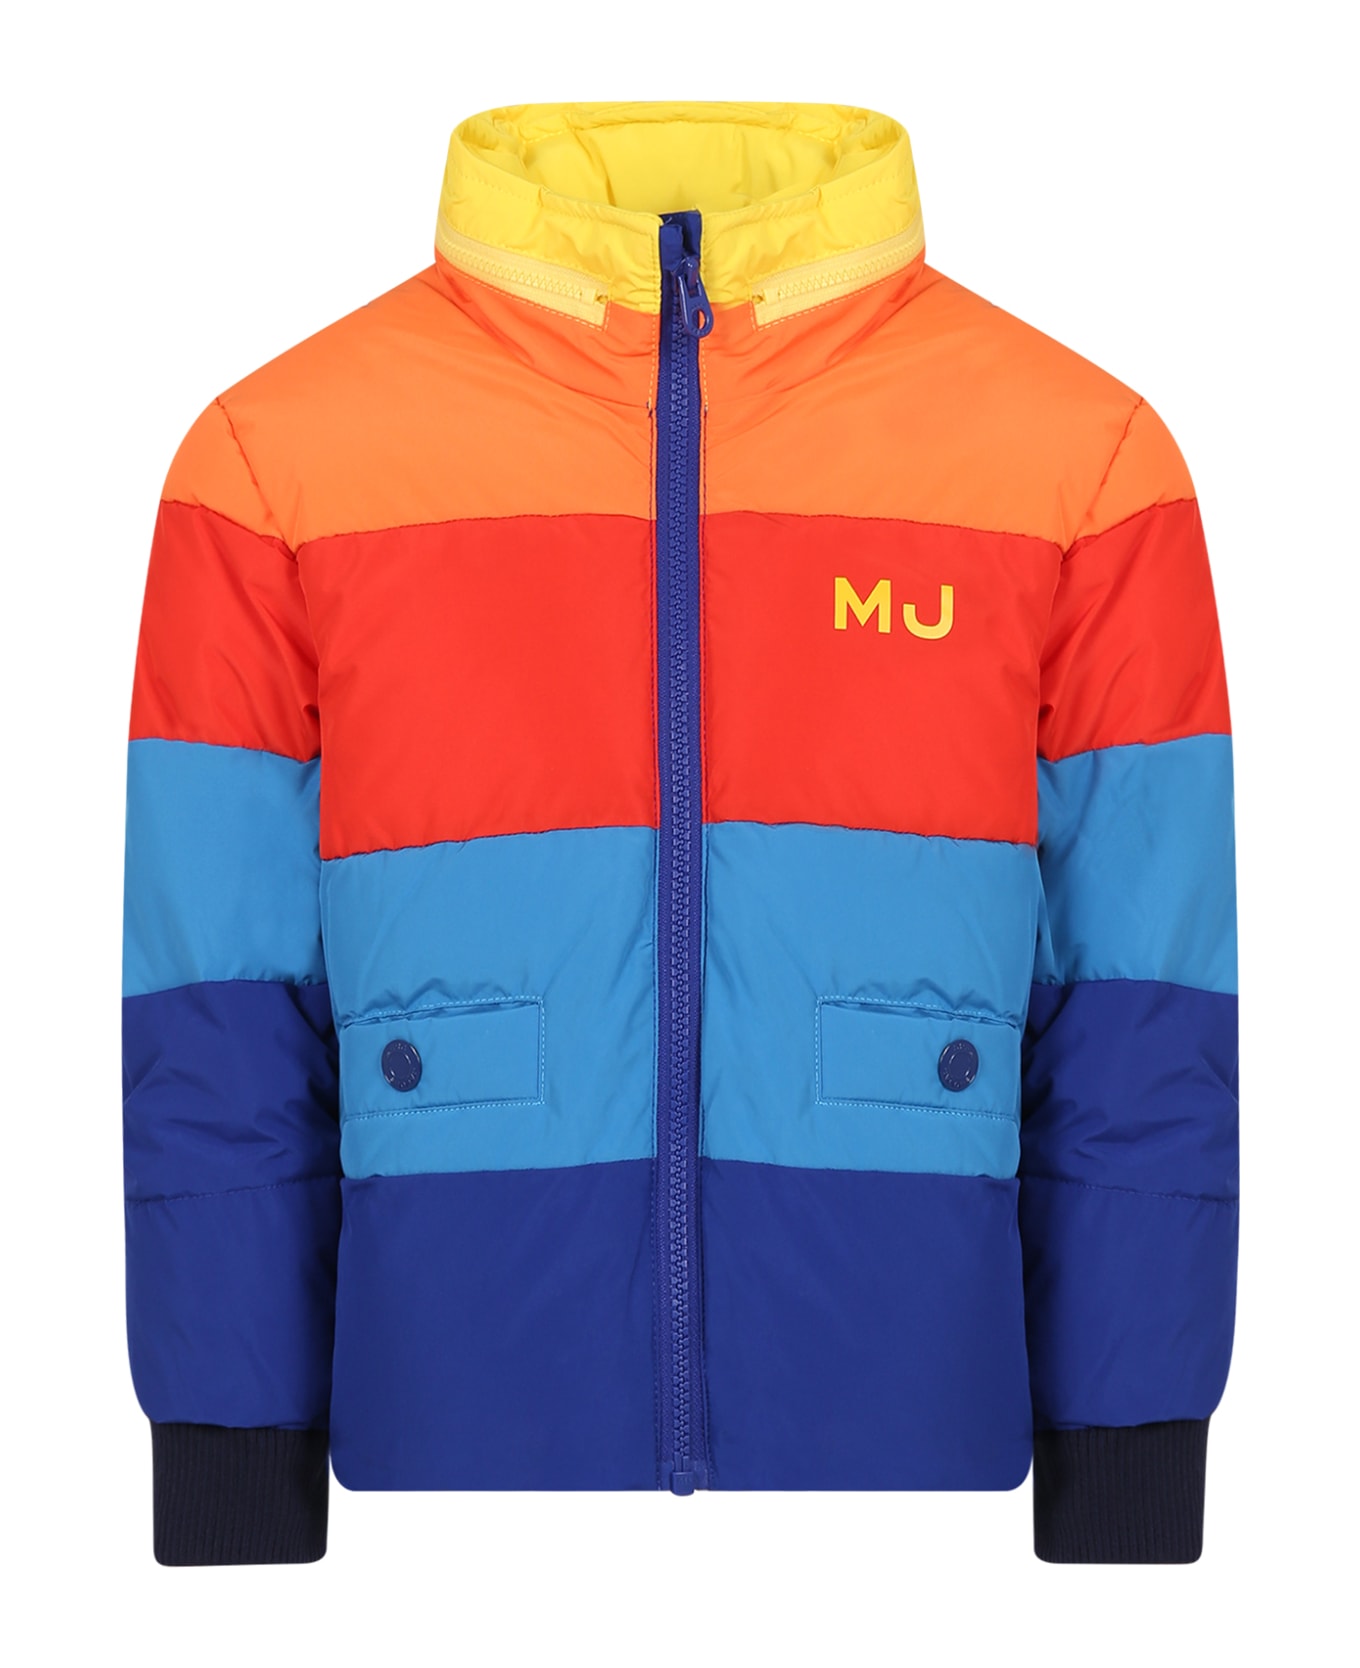 Marc Jacobs Multicolor Padded Jacket For Boy - Multicolor